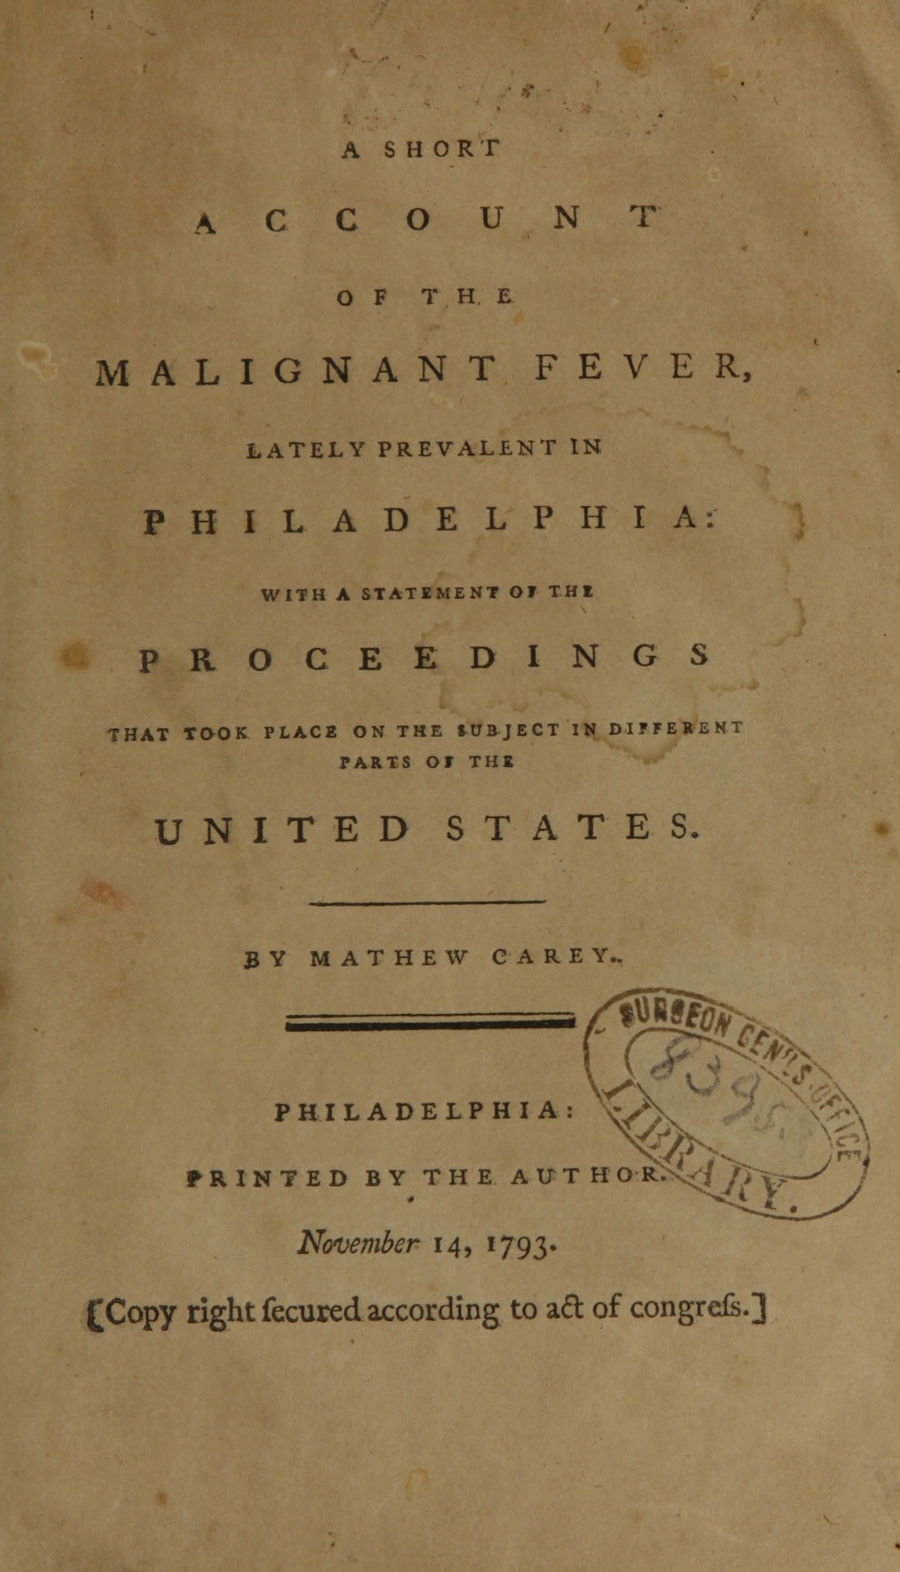 a pamphlet cover showing the title and author